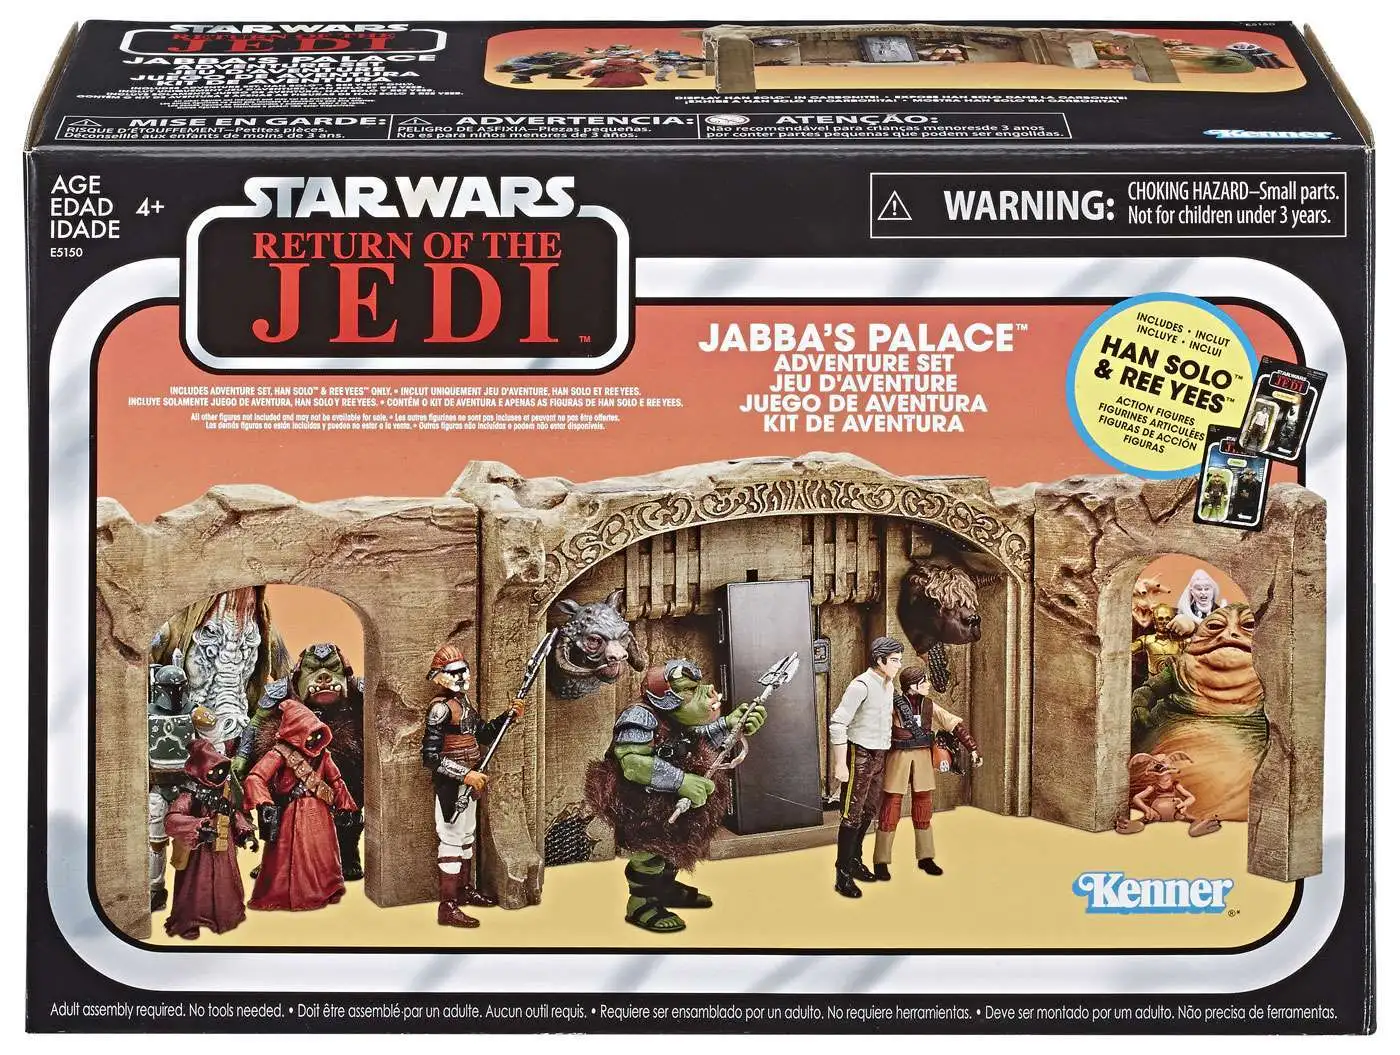 HASBRO STAR WARS VINTAGE COLLECTION JABBA'S PALACE HAN SOLO ADVENTURE PLAYSET 